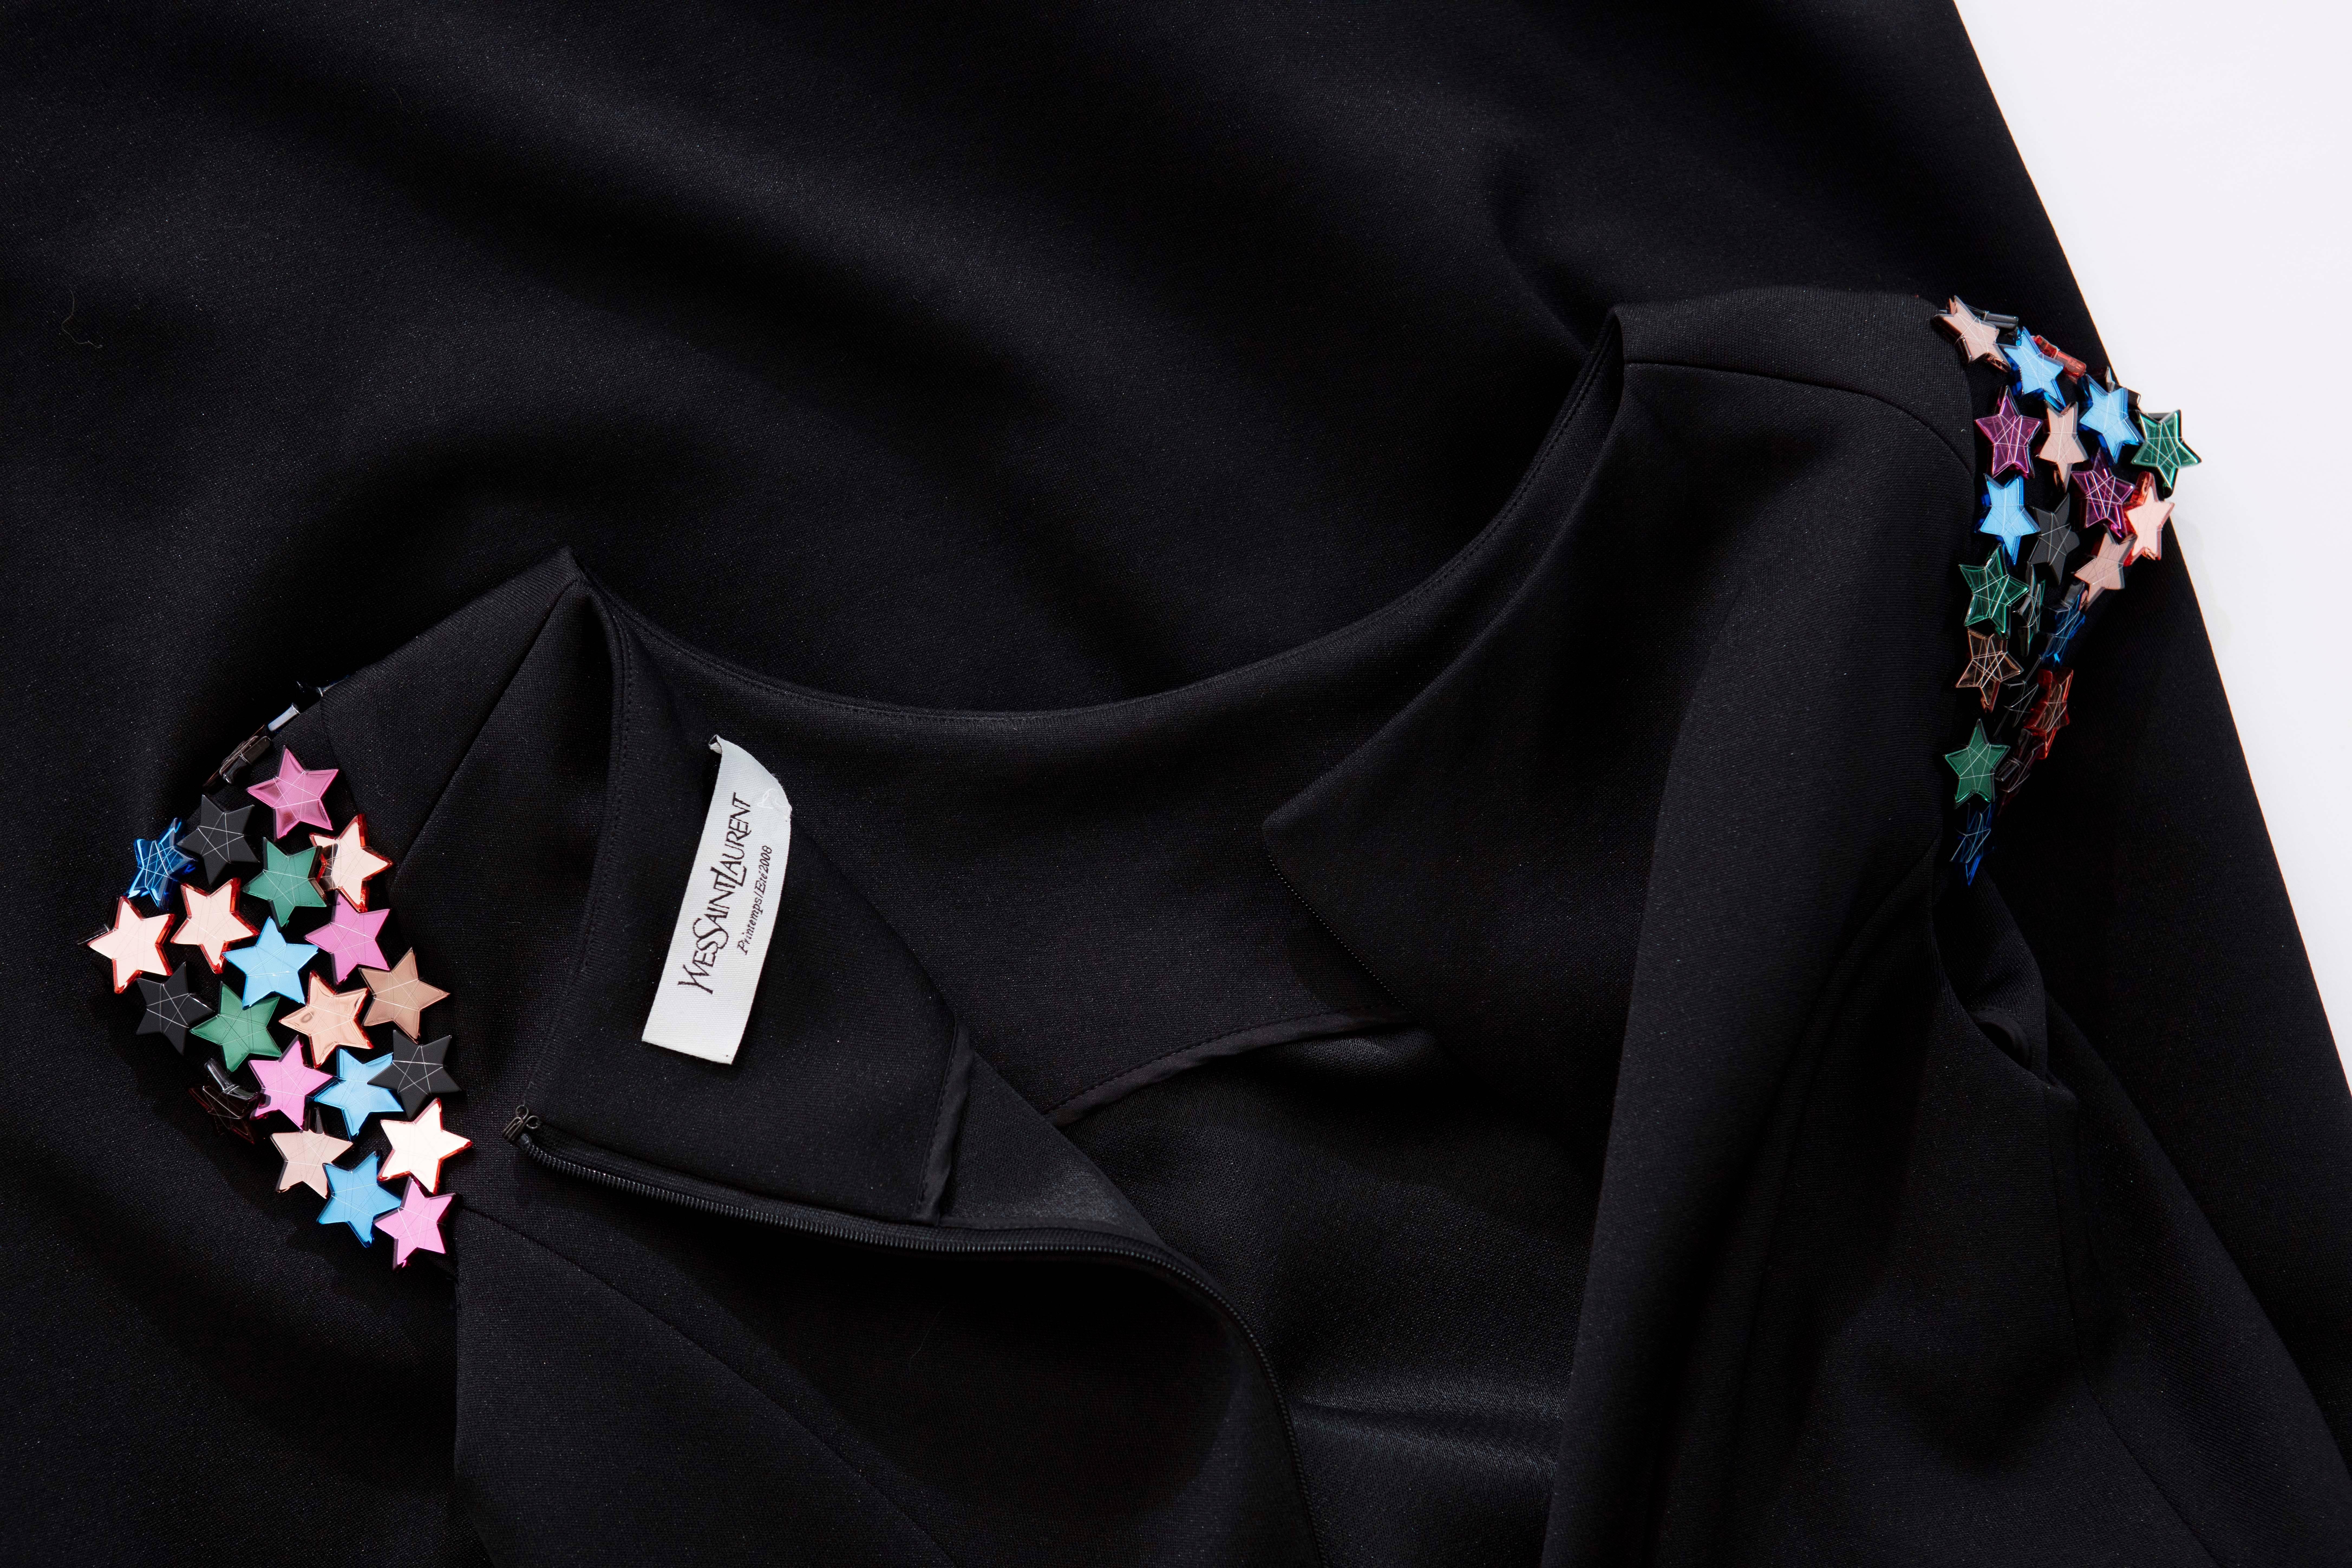 Yves Saint Laurent Black A - Line Dress With Mirrored Stars At Sleeve For Sale 6